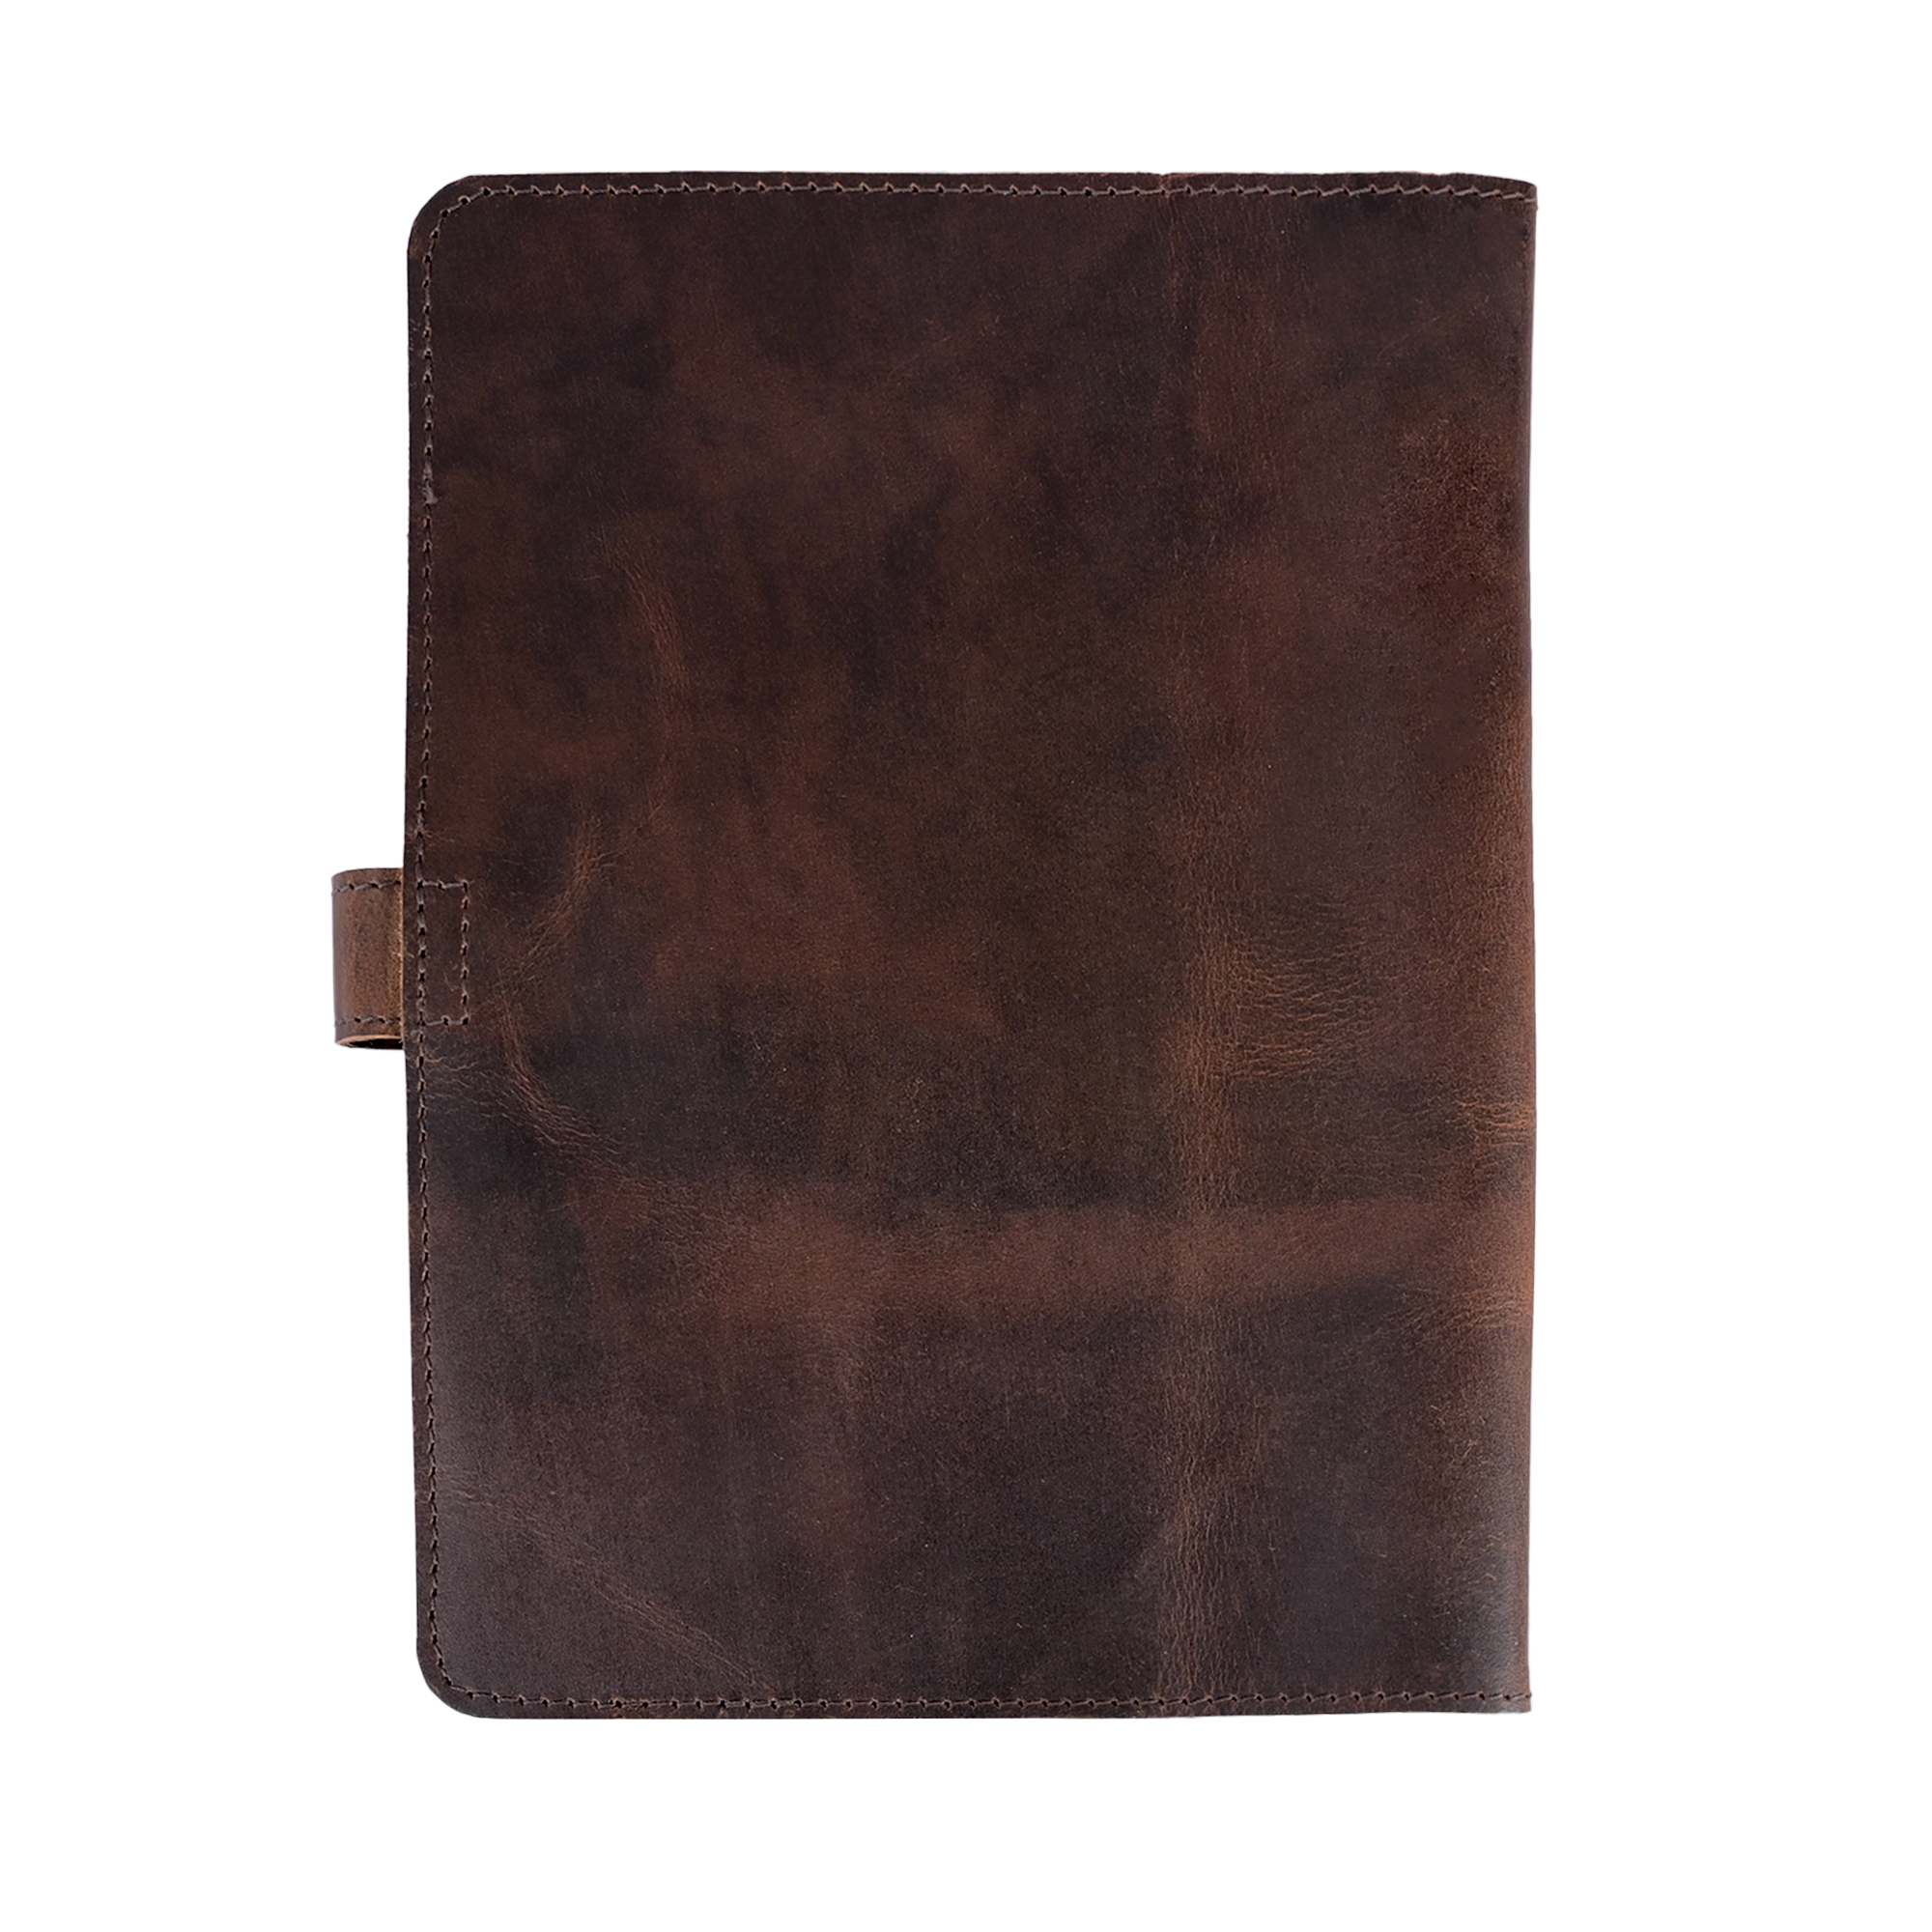 Xtra Small Leather Bible Cover